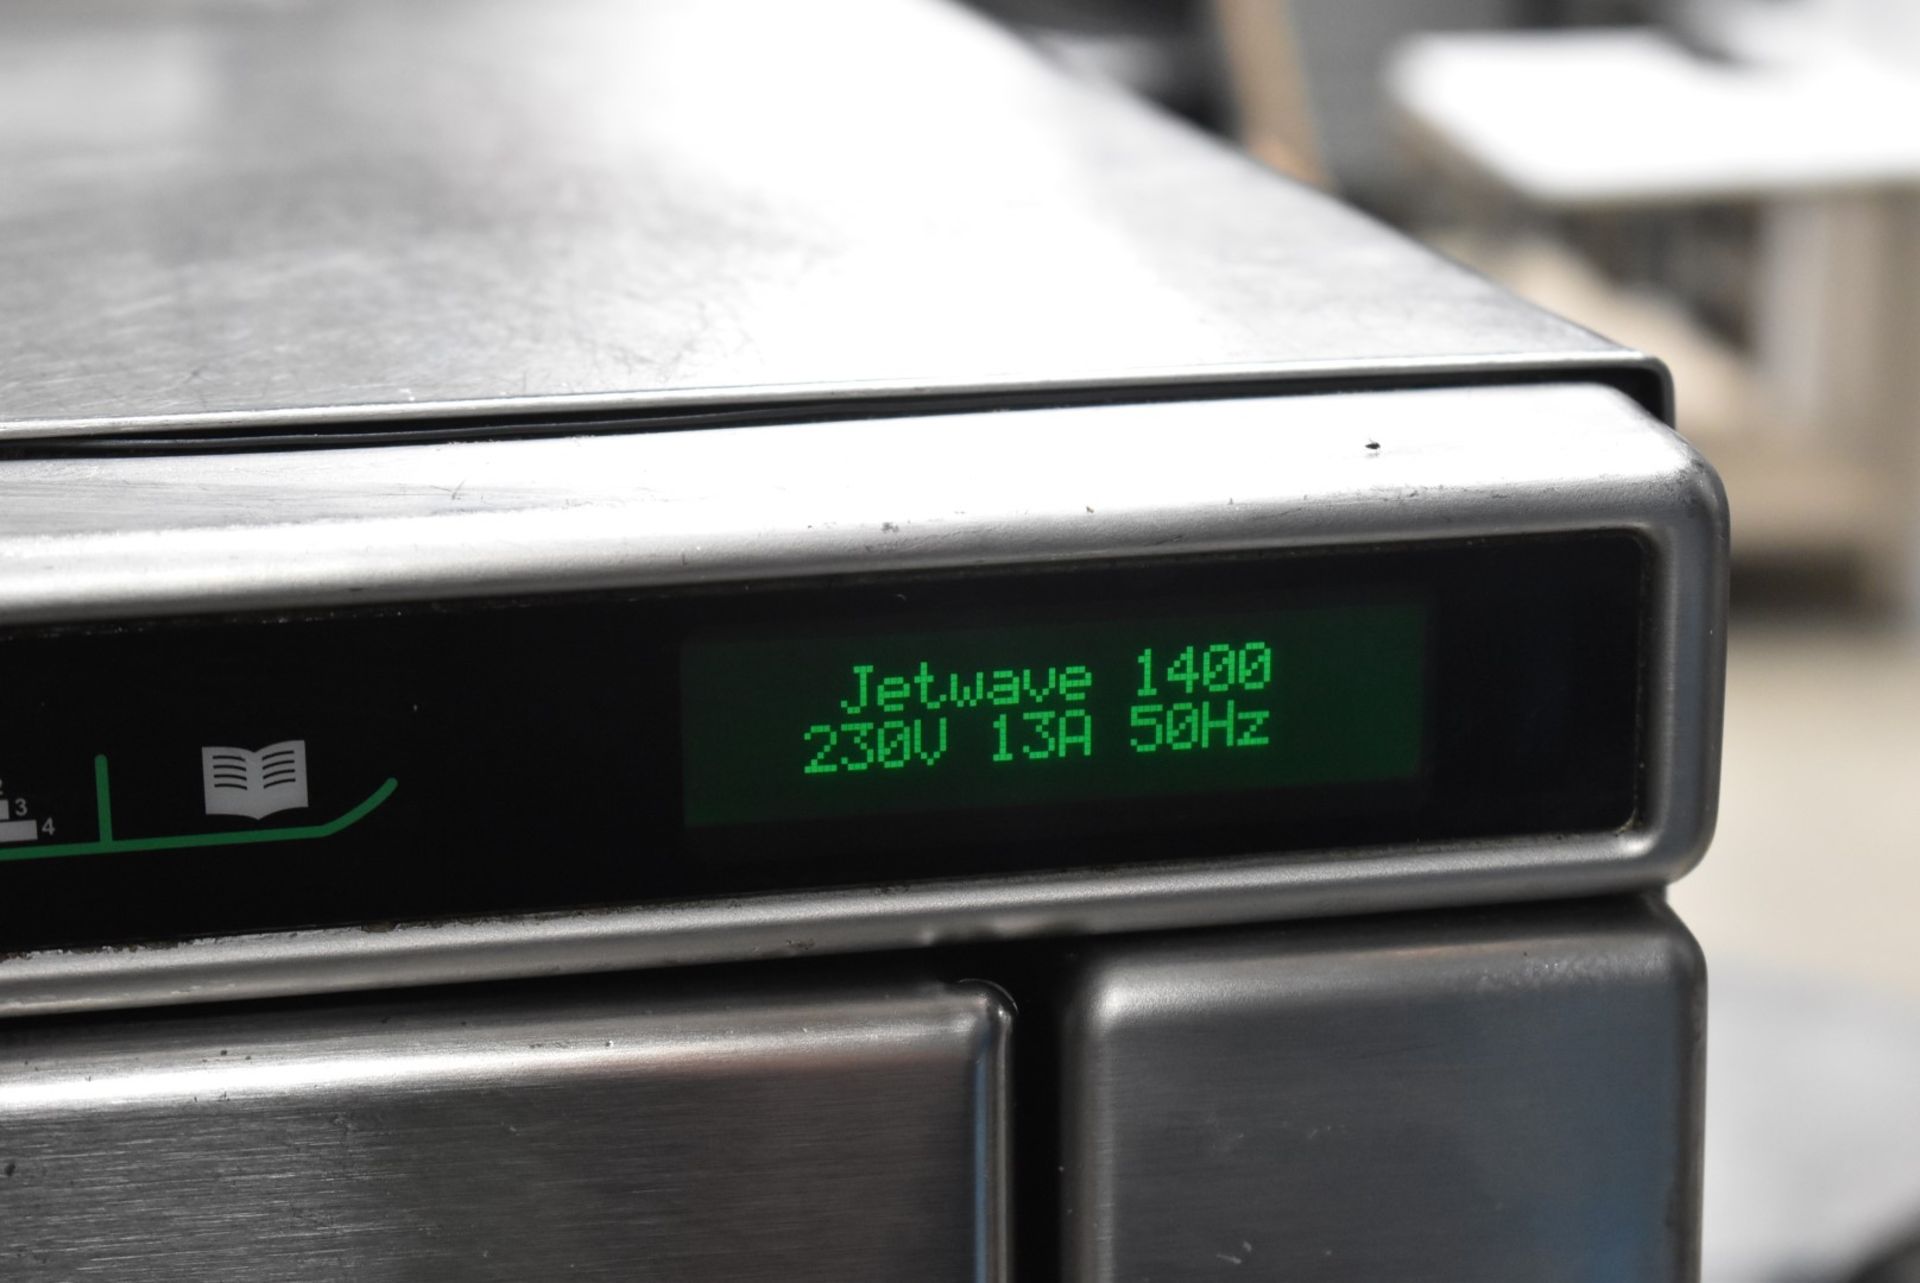 1 x Menumaster Jetwave JET514U High Speed Combination Microwave Oven - RRP £2,400 - Manufacture - Image 5 of 11